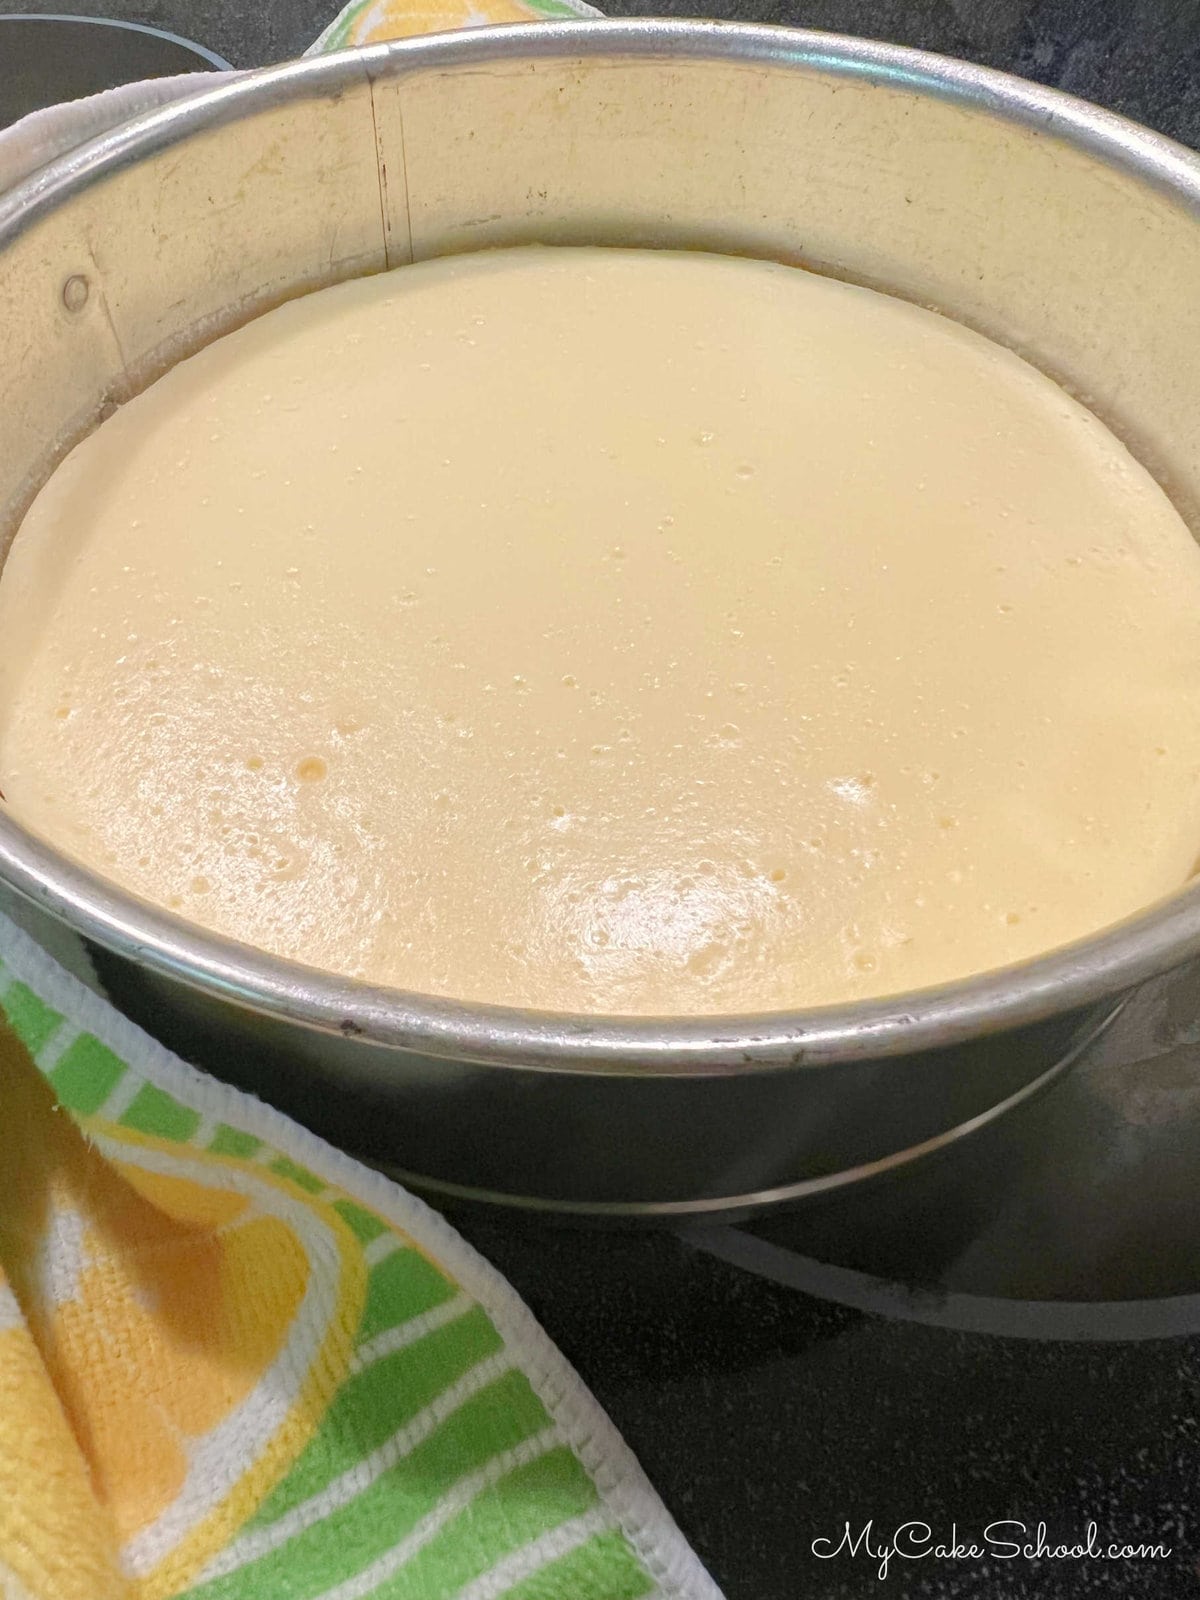 Freshly baked cheesecake layer cooling in the pan on countertop